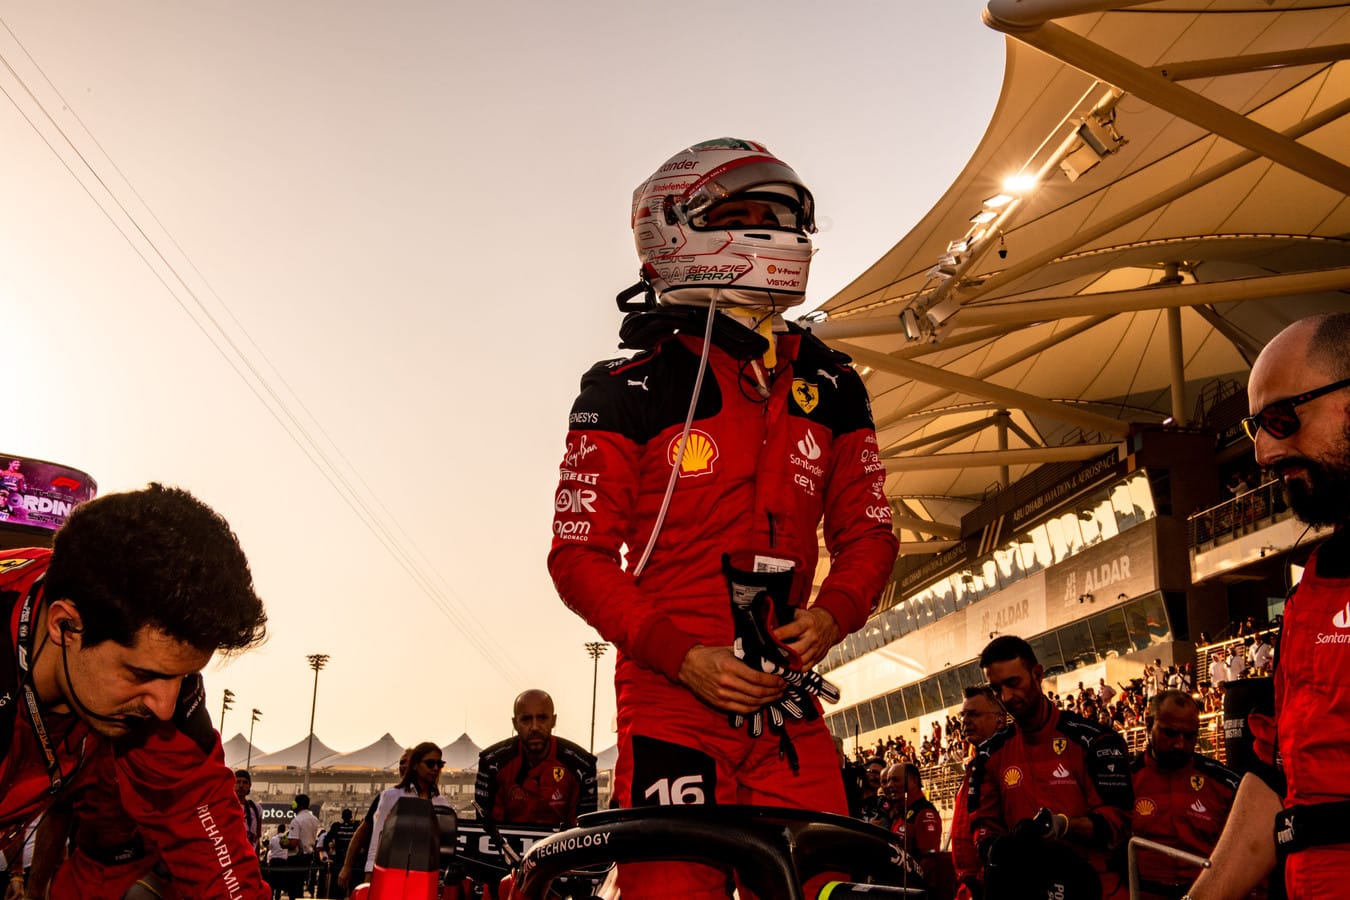 Charles Leclerc signs multi-year extension with Ferrari – NBC 6